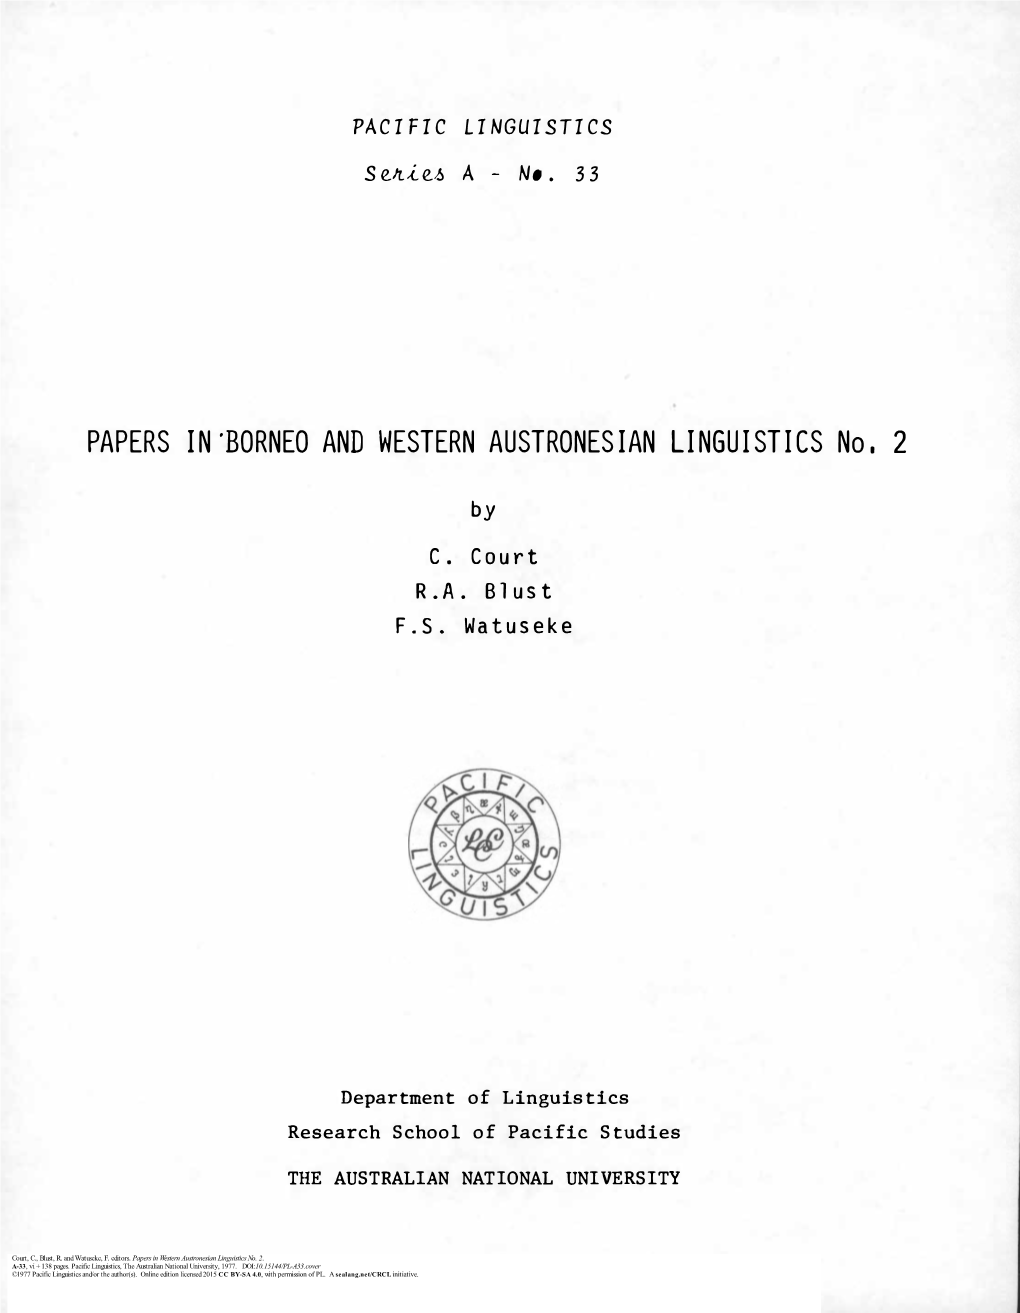 Papers in Western Austronesian Linguistics No. 2